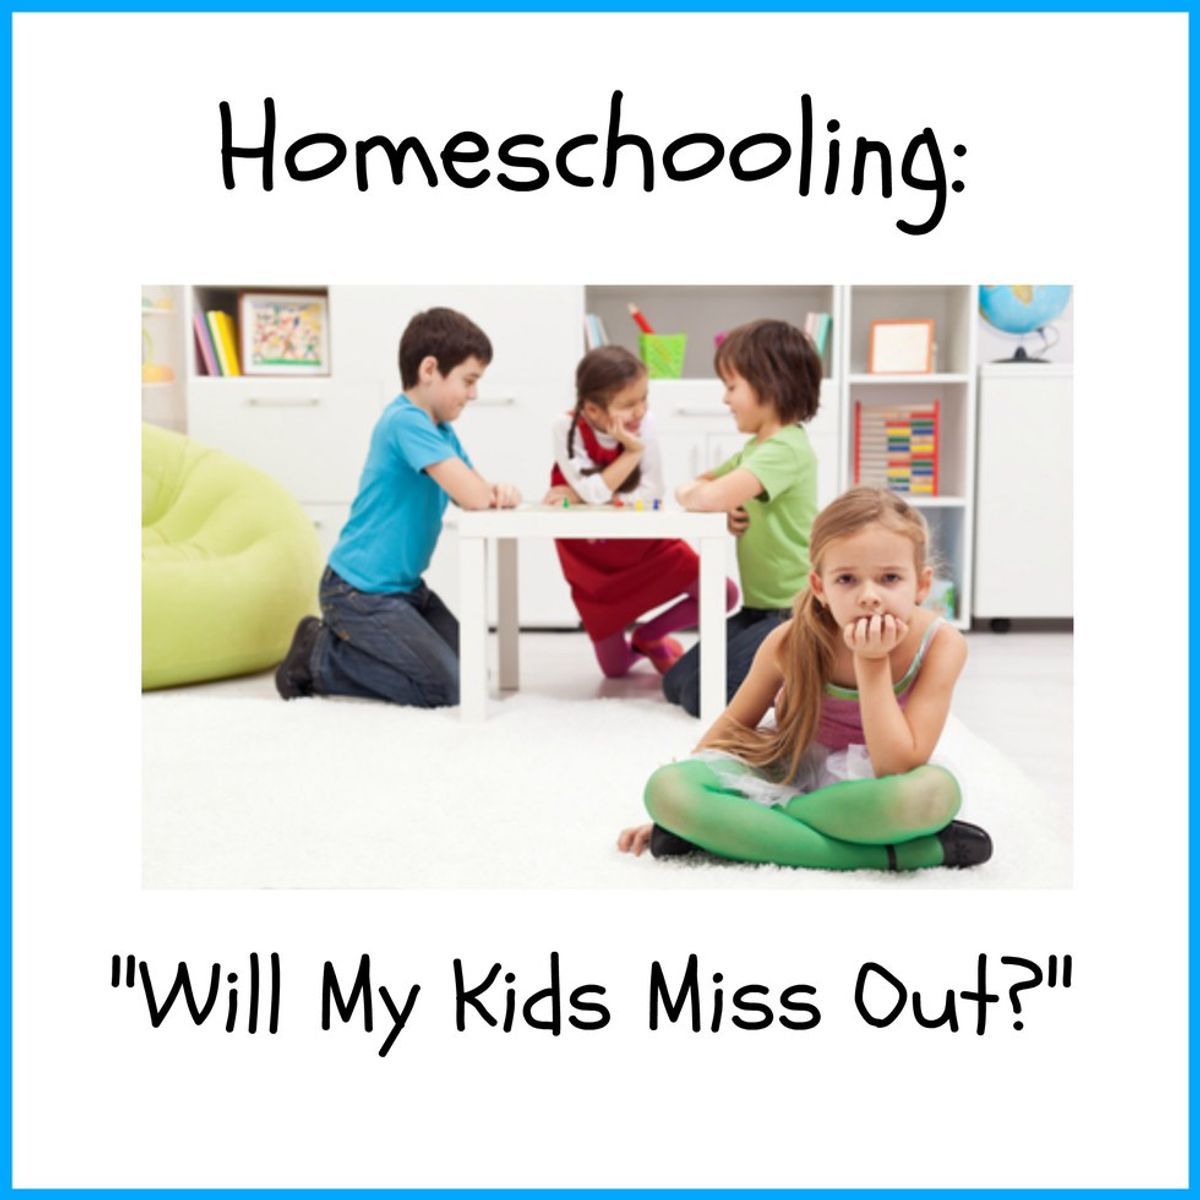 Stereotypes of Homeschooling